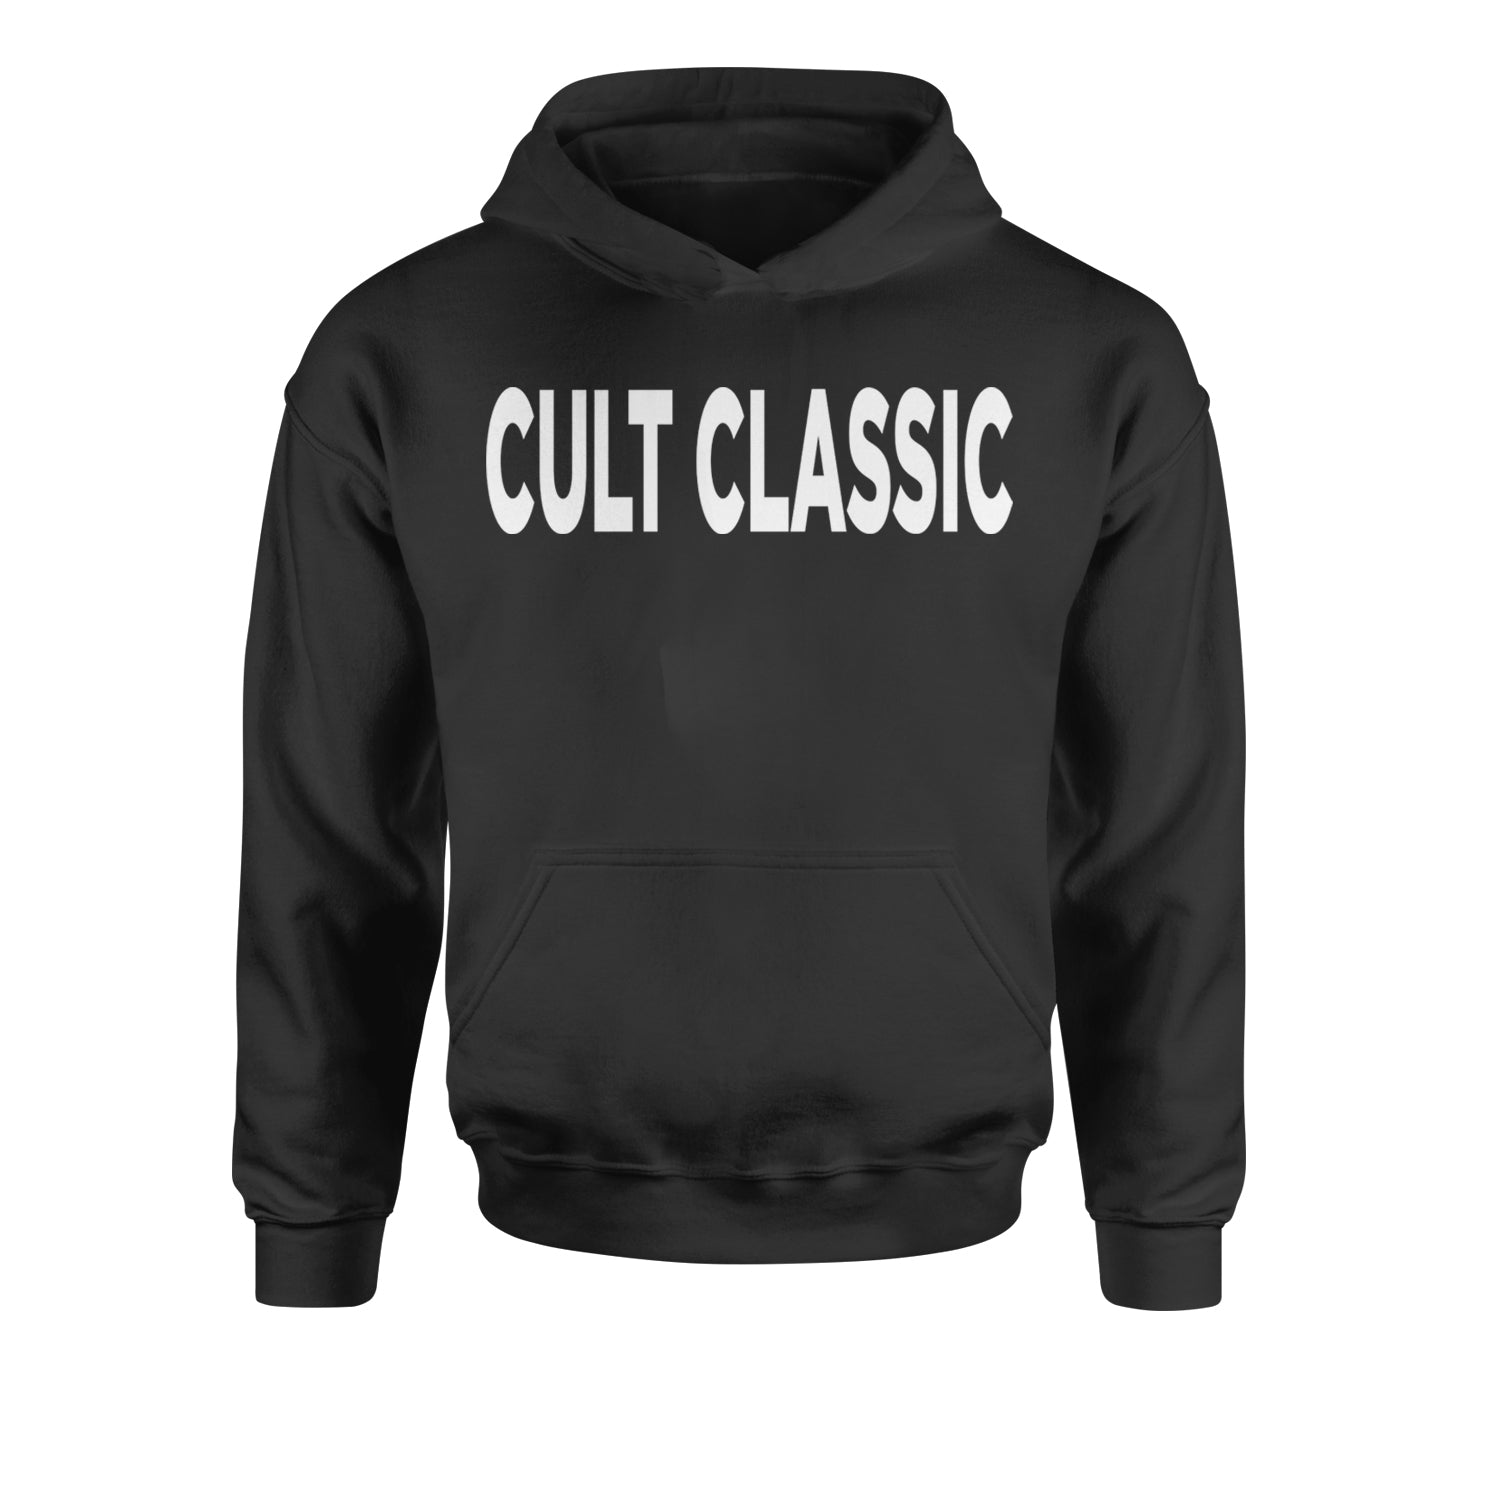 Cult Classic Party Girl Brat Youth-Sized Hoodie